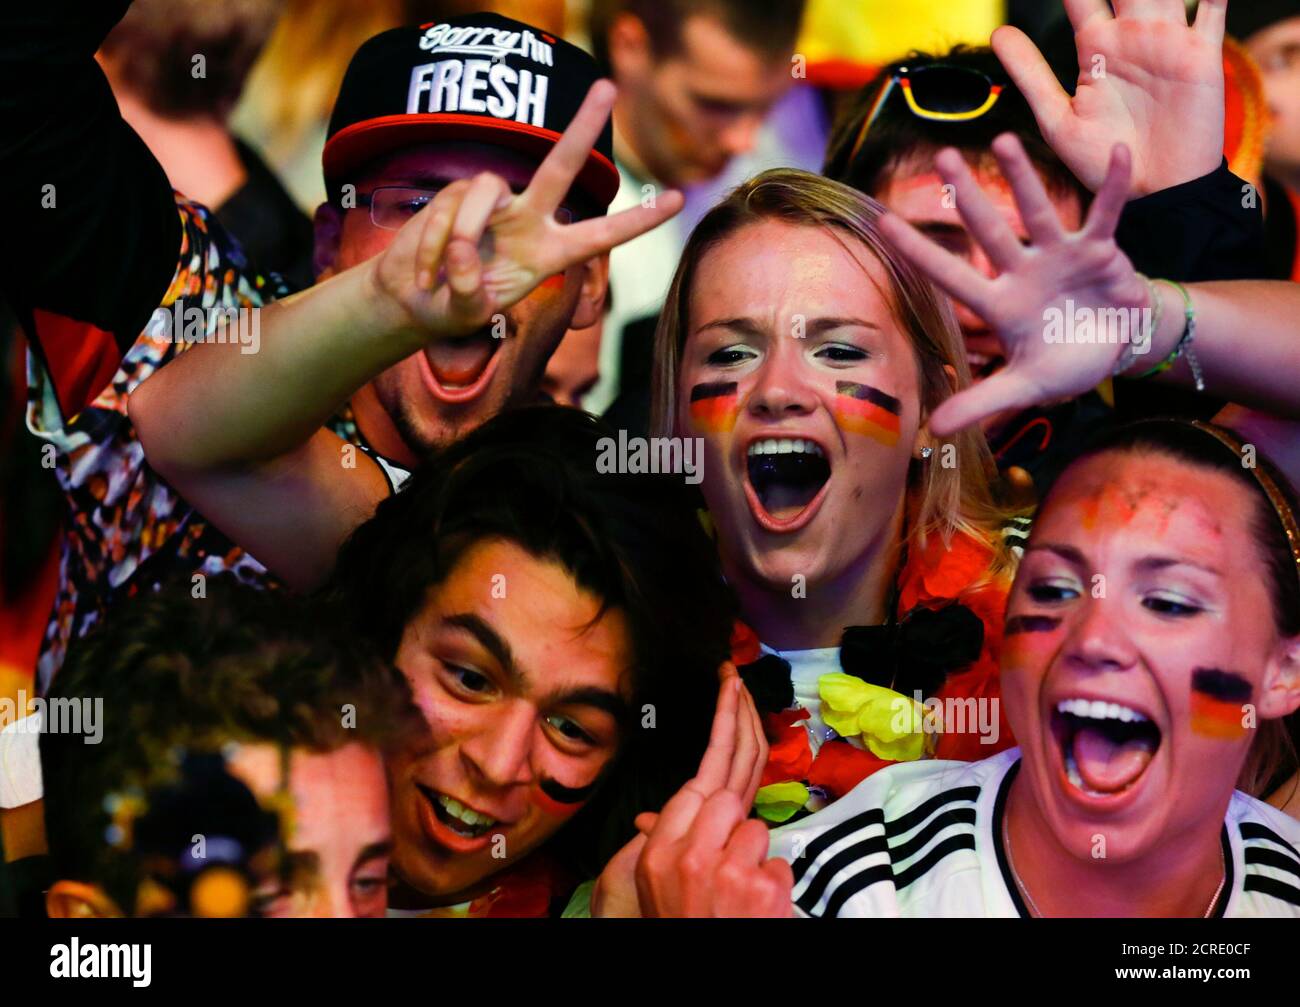 People celebrate after Germany defeated Brazil during their 2014 World Cup semi-finals, at the Fanmeile public viewing arena in Berlin July 8, 2014.  REUTERS/Thomas Peter (GERMANY - Tags: SPORT SOCCER WORLD CUP) Stock Photo